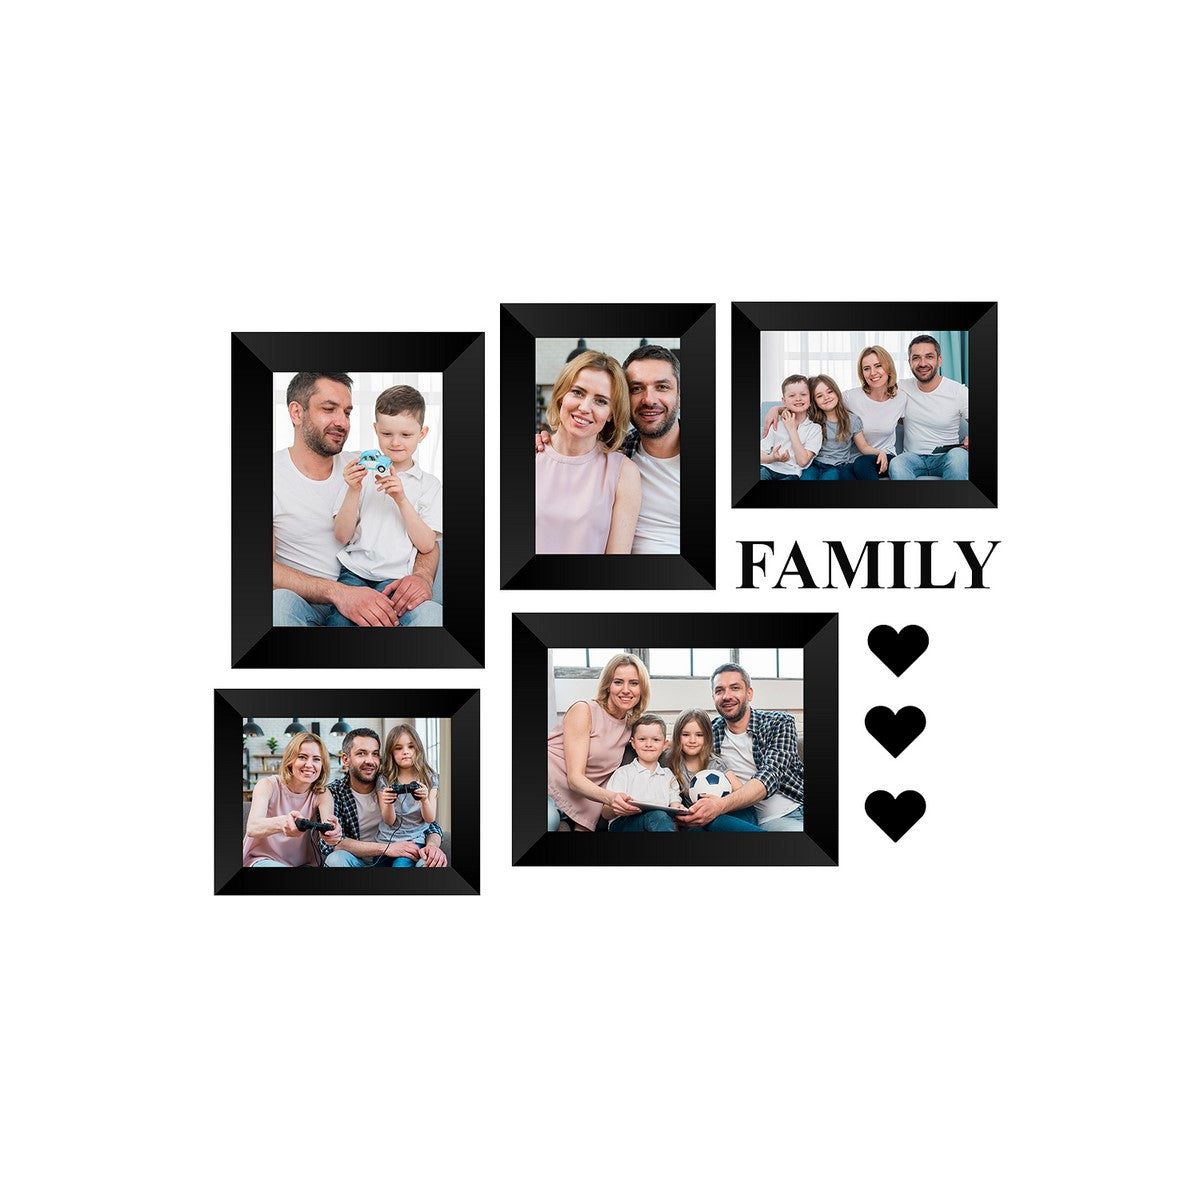 Memory Wall Collage Photo Frame - Set of 5 Photo Frames for 3 Photos of 4"x6", 2 Photos of 5"x7", 1 Piece of FAMILY, 3 Pieces of HEARTS